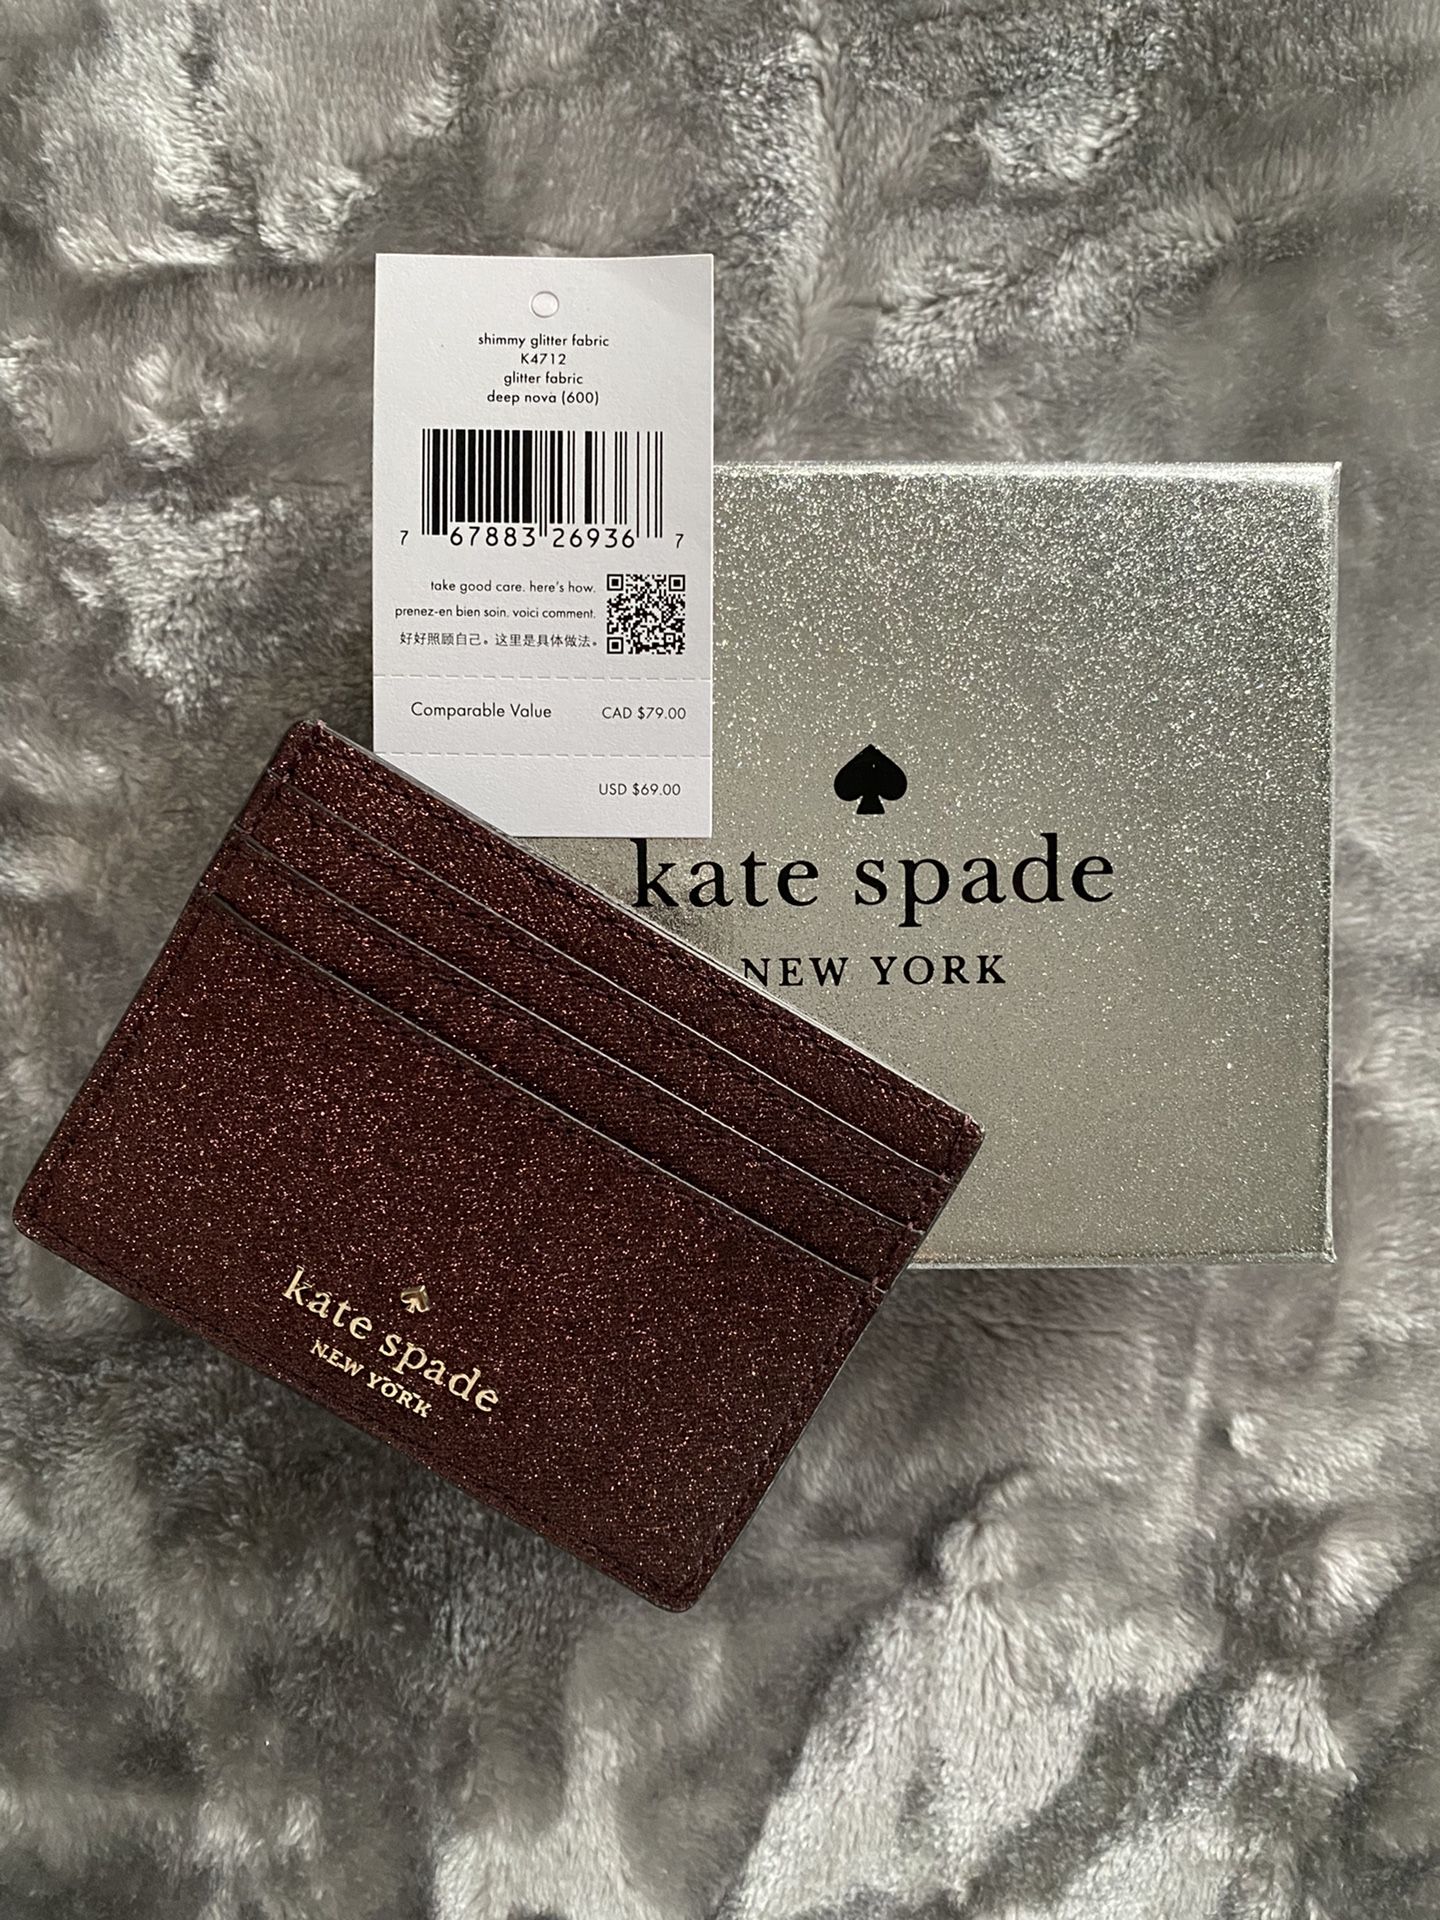 Kate Spade shimmy glitter boxed small cardholder